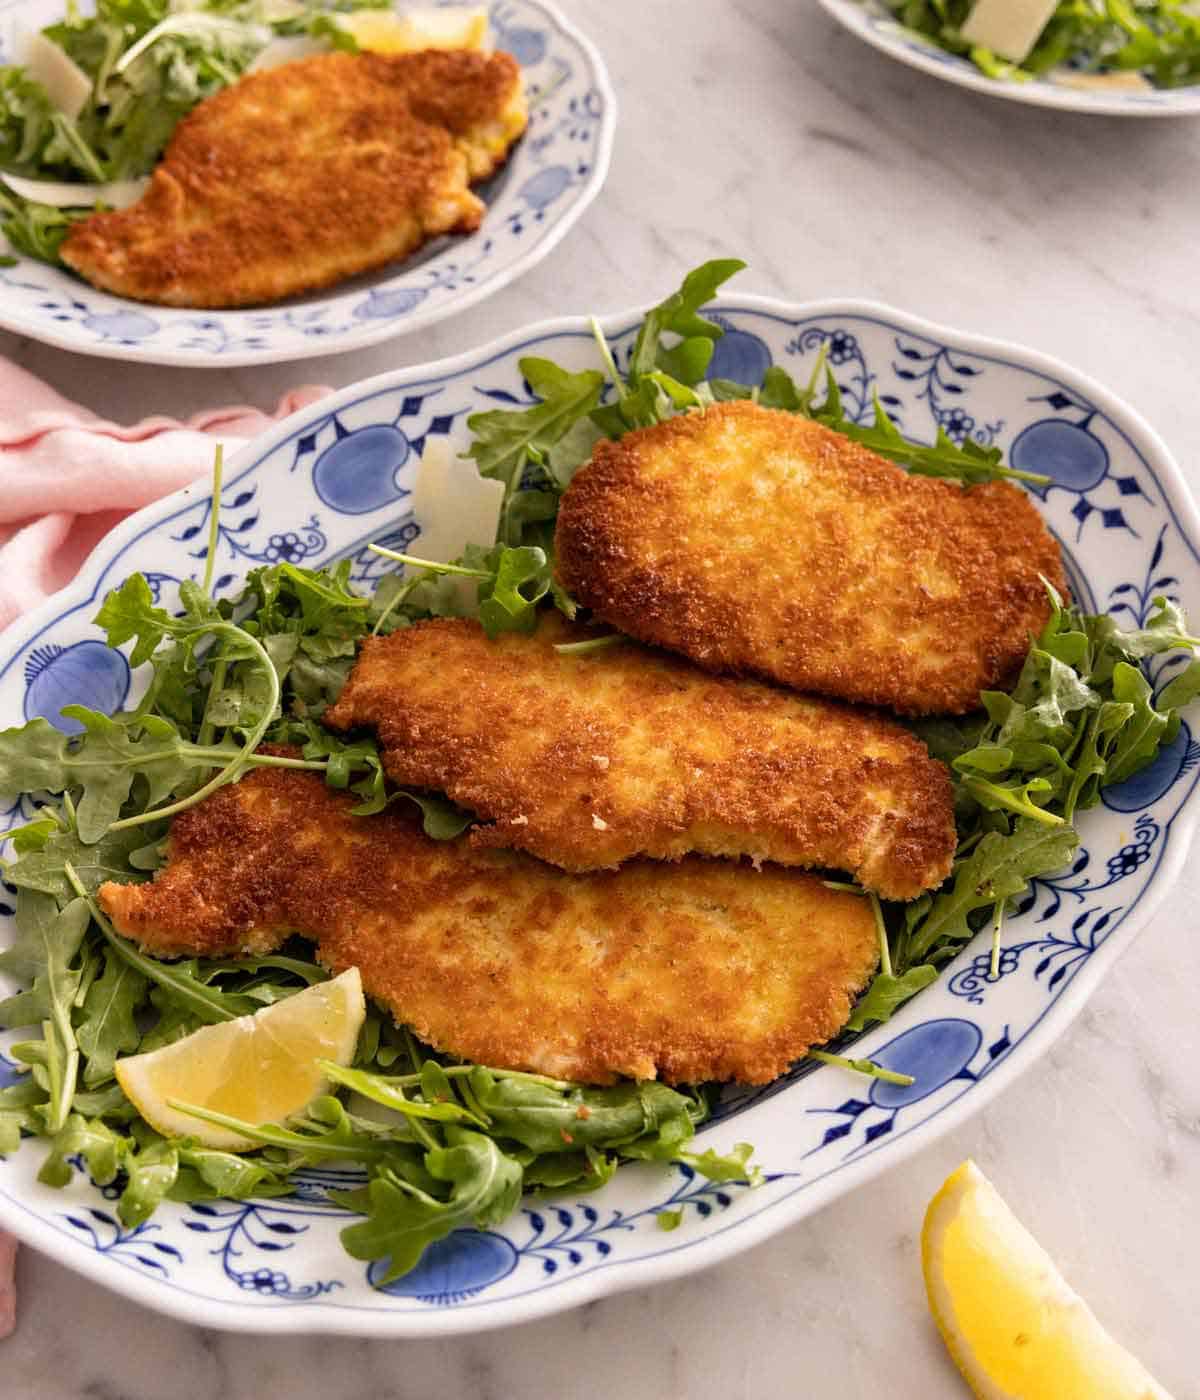 A platter of chicken Milanese over a bed of arugula.